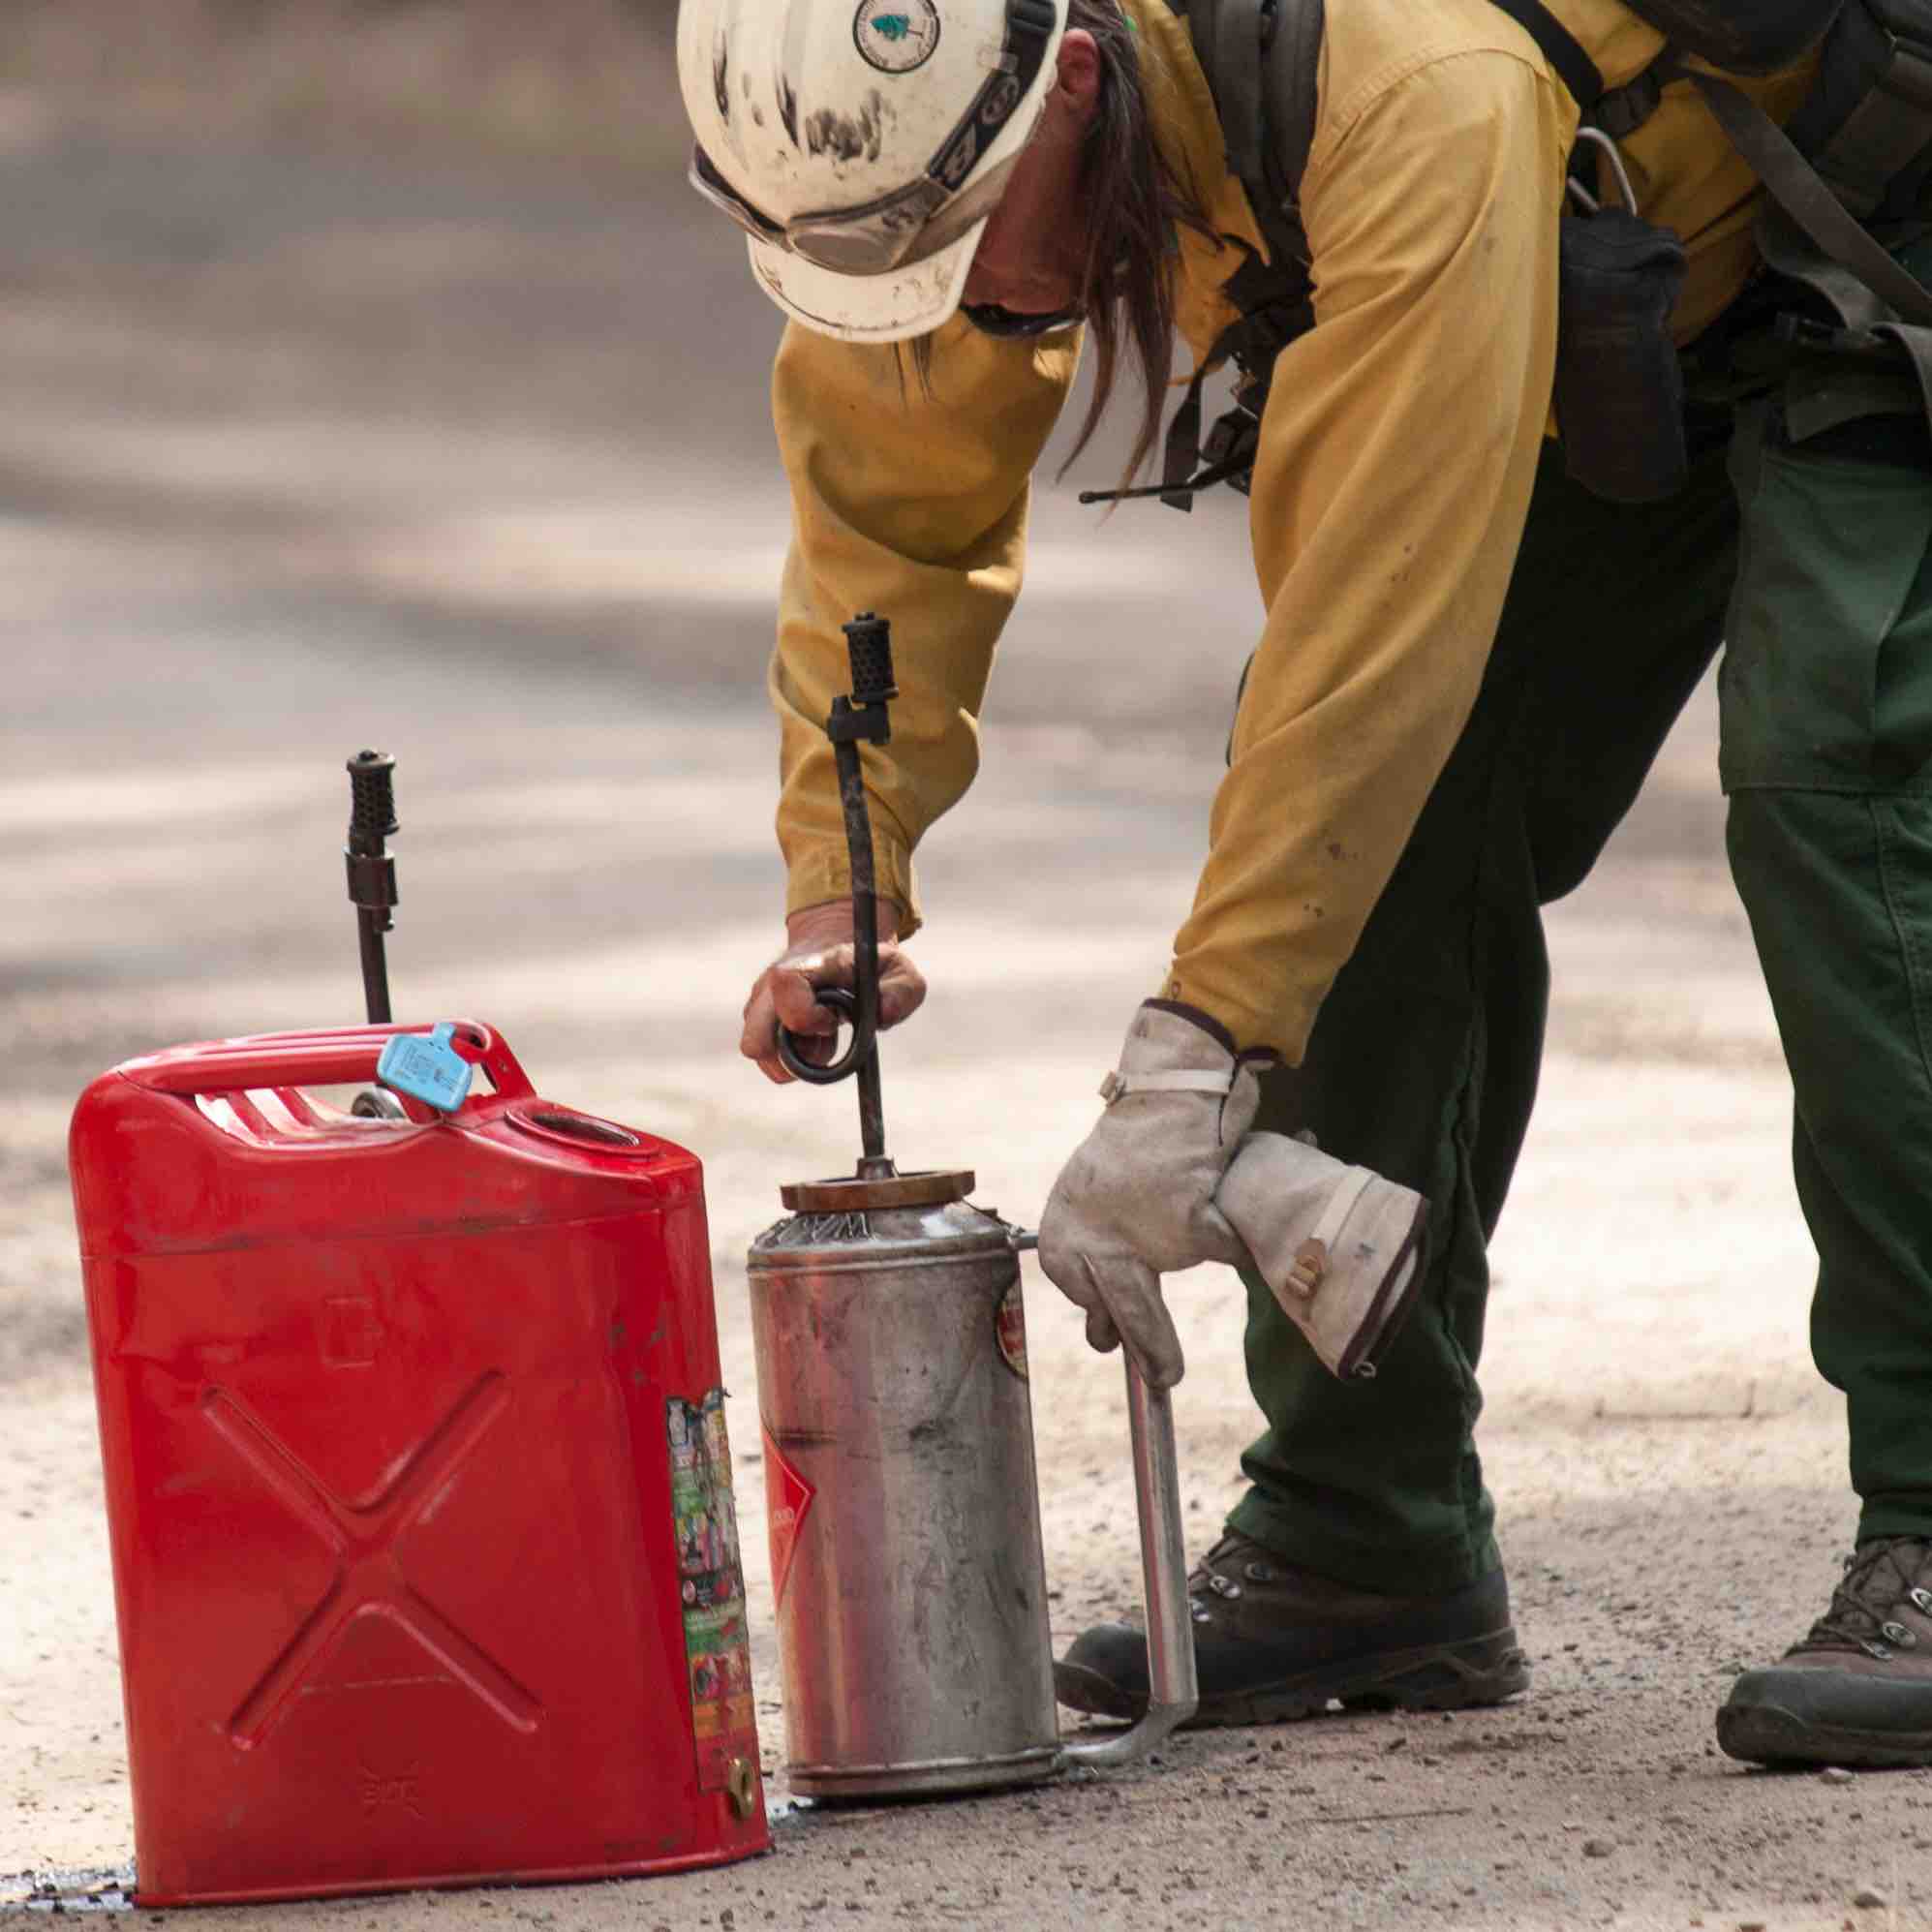 firefighter in helmet and yellows unscrewing a drip torch to refill from nearby gas can.